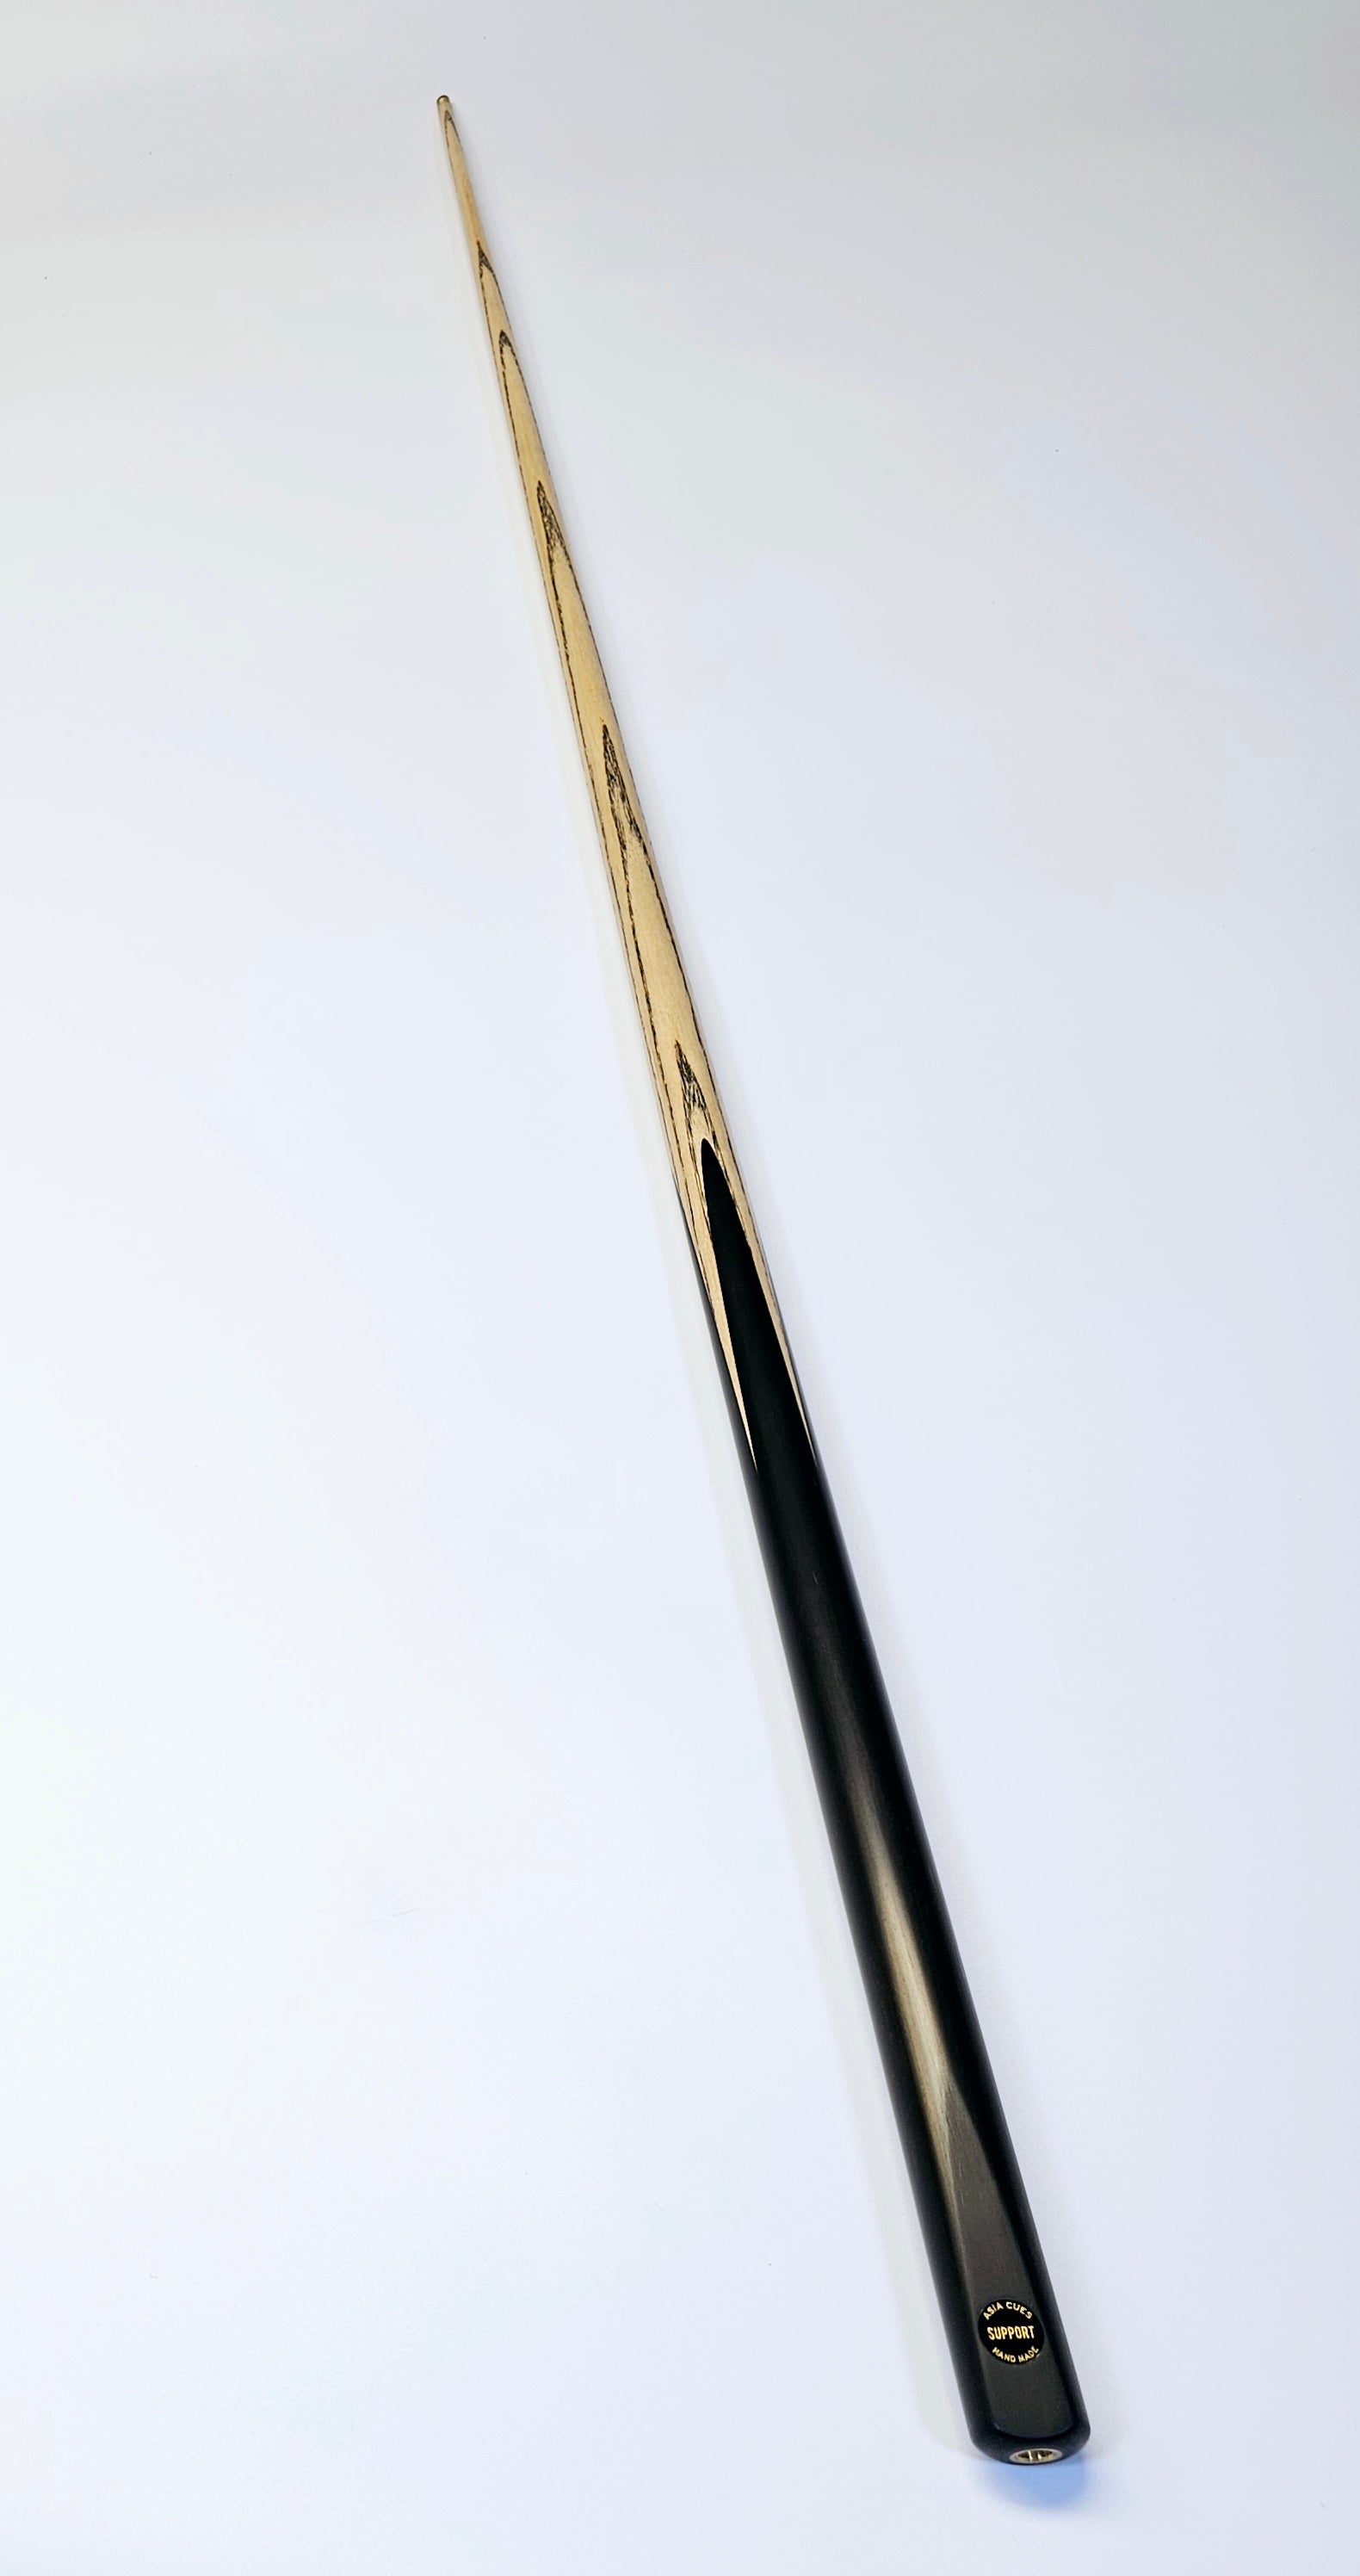 Asia Cues Support - One Piece Pool Cue 9mm Tip, 18oz, 57"